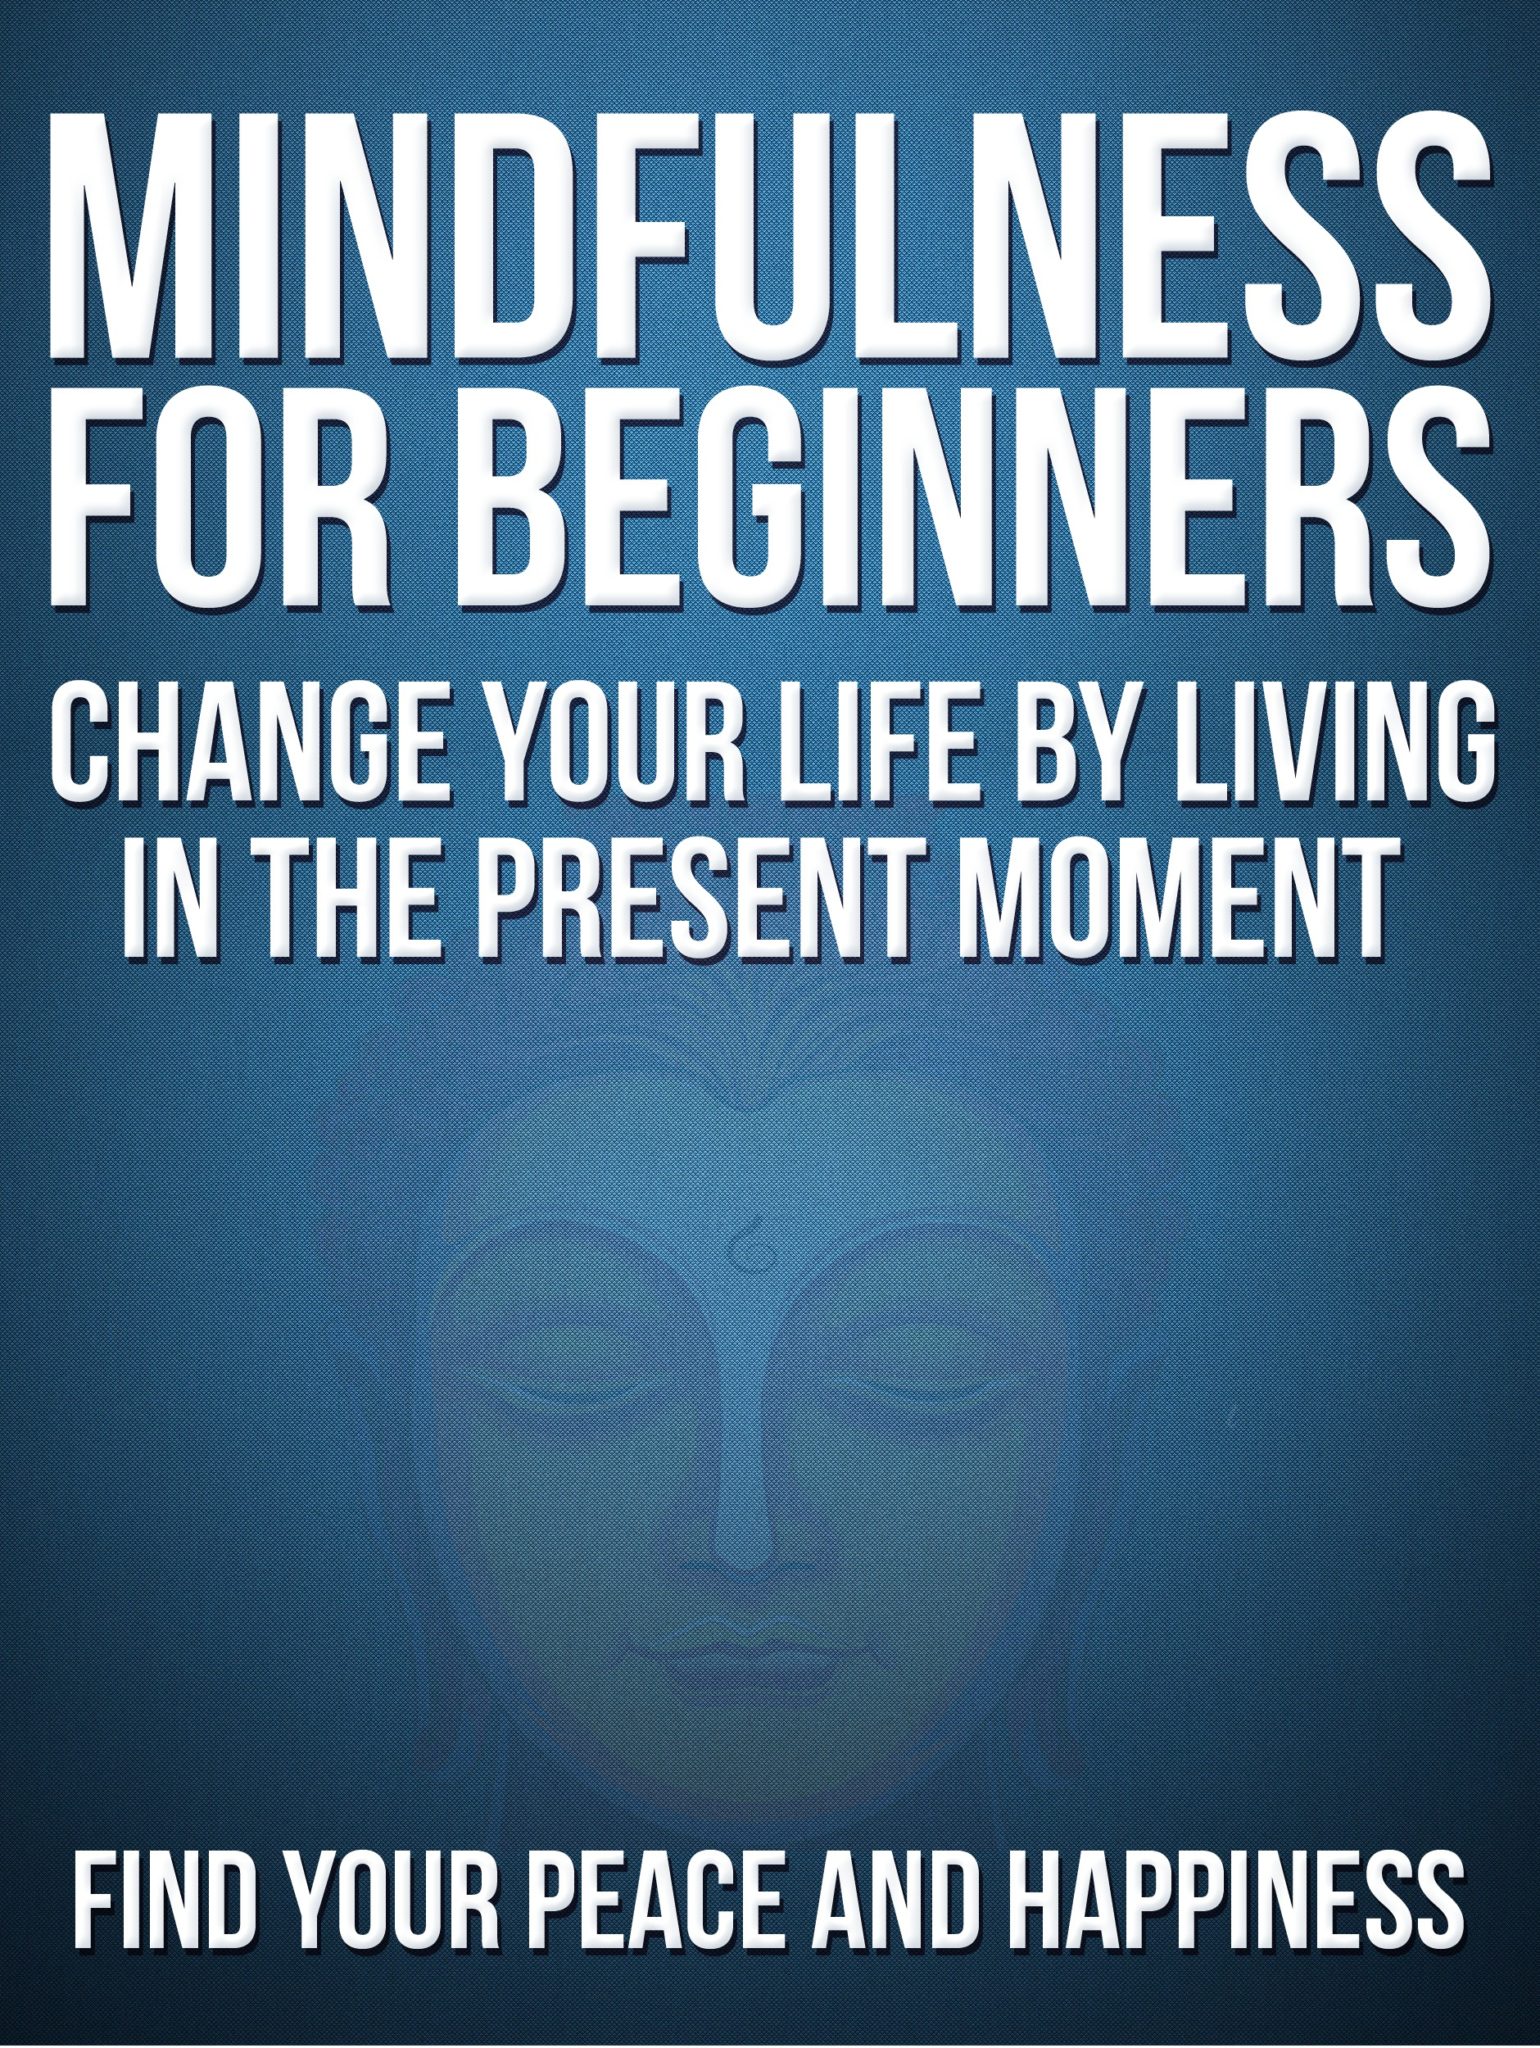 Mindfulness For Beginners: Change your life by living in the present moment without stress, Find your Peace and  Happiness by BOB SMITH